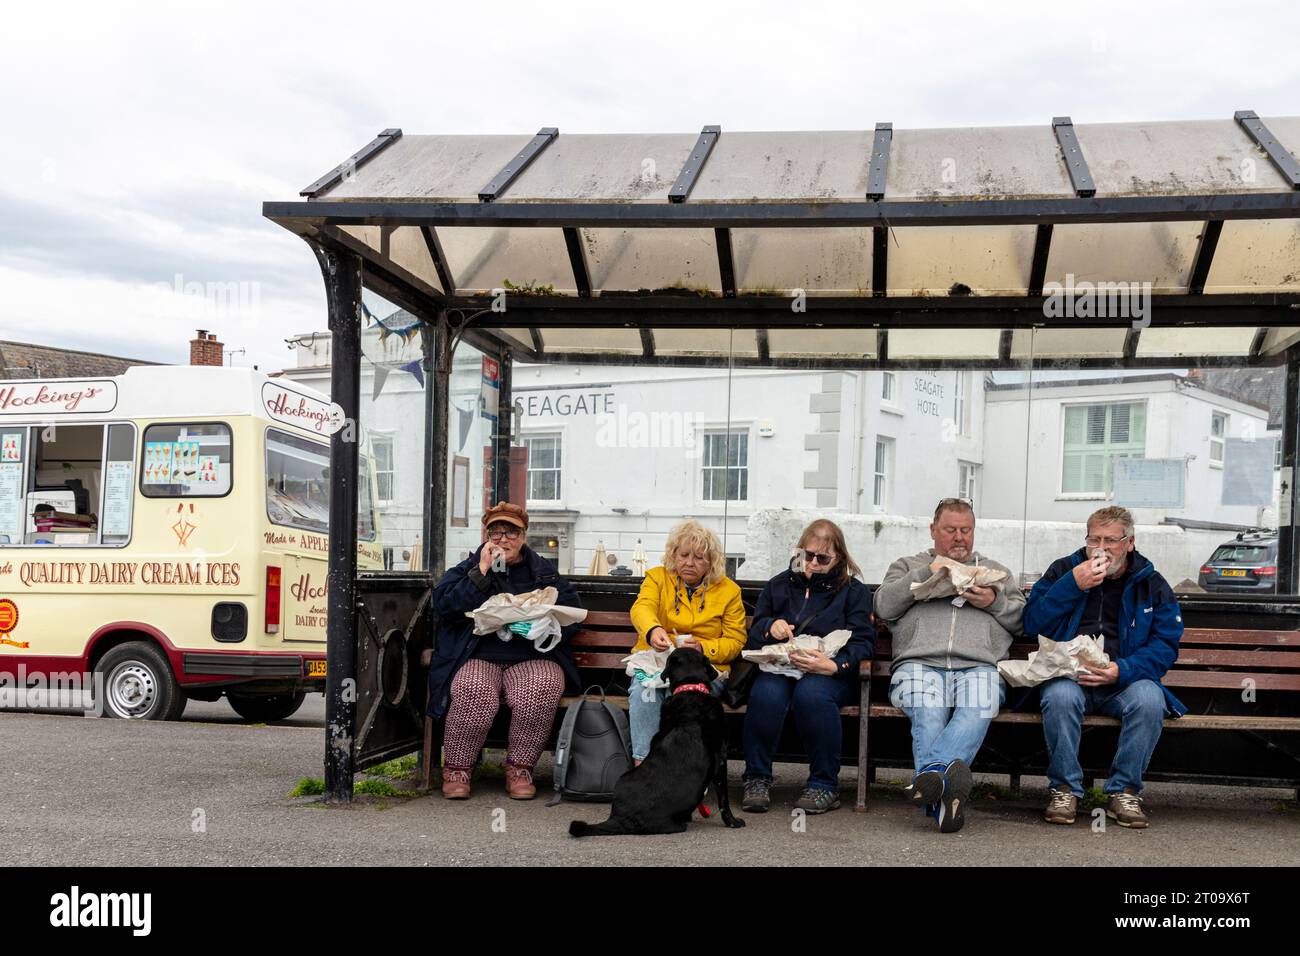 fish and chips, eating fish and chips, eating outside,  fat people, obese, obesity, eating fish and chips out of paper, al fresco, bus shelter Stock Photo